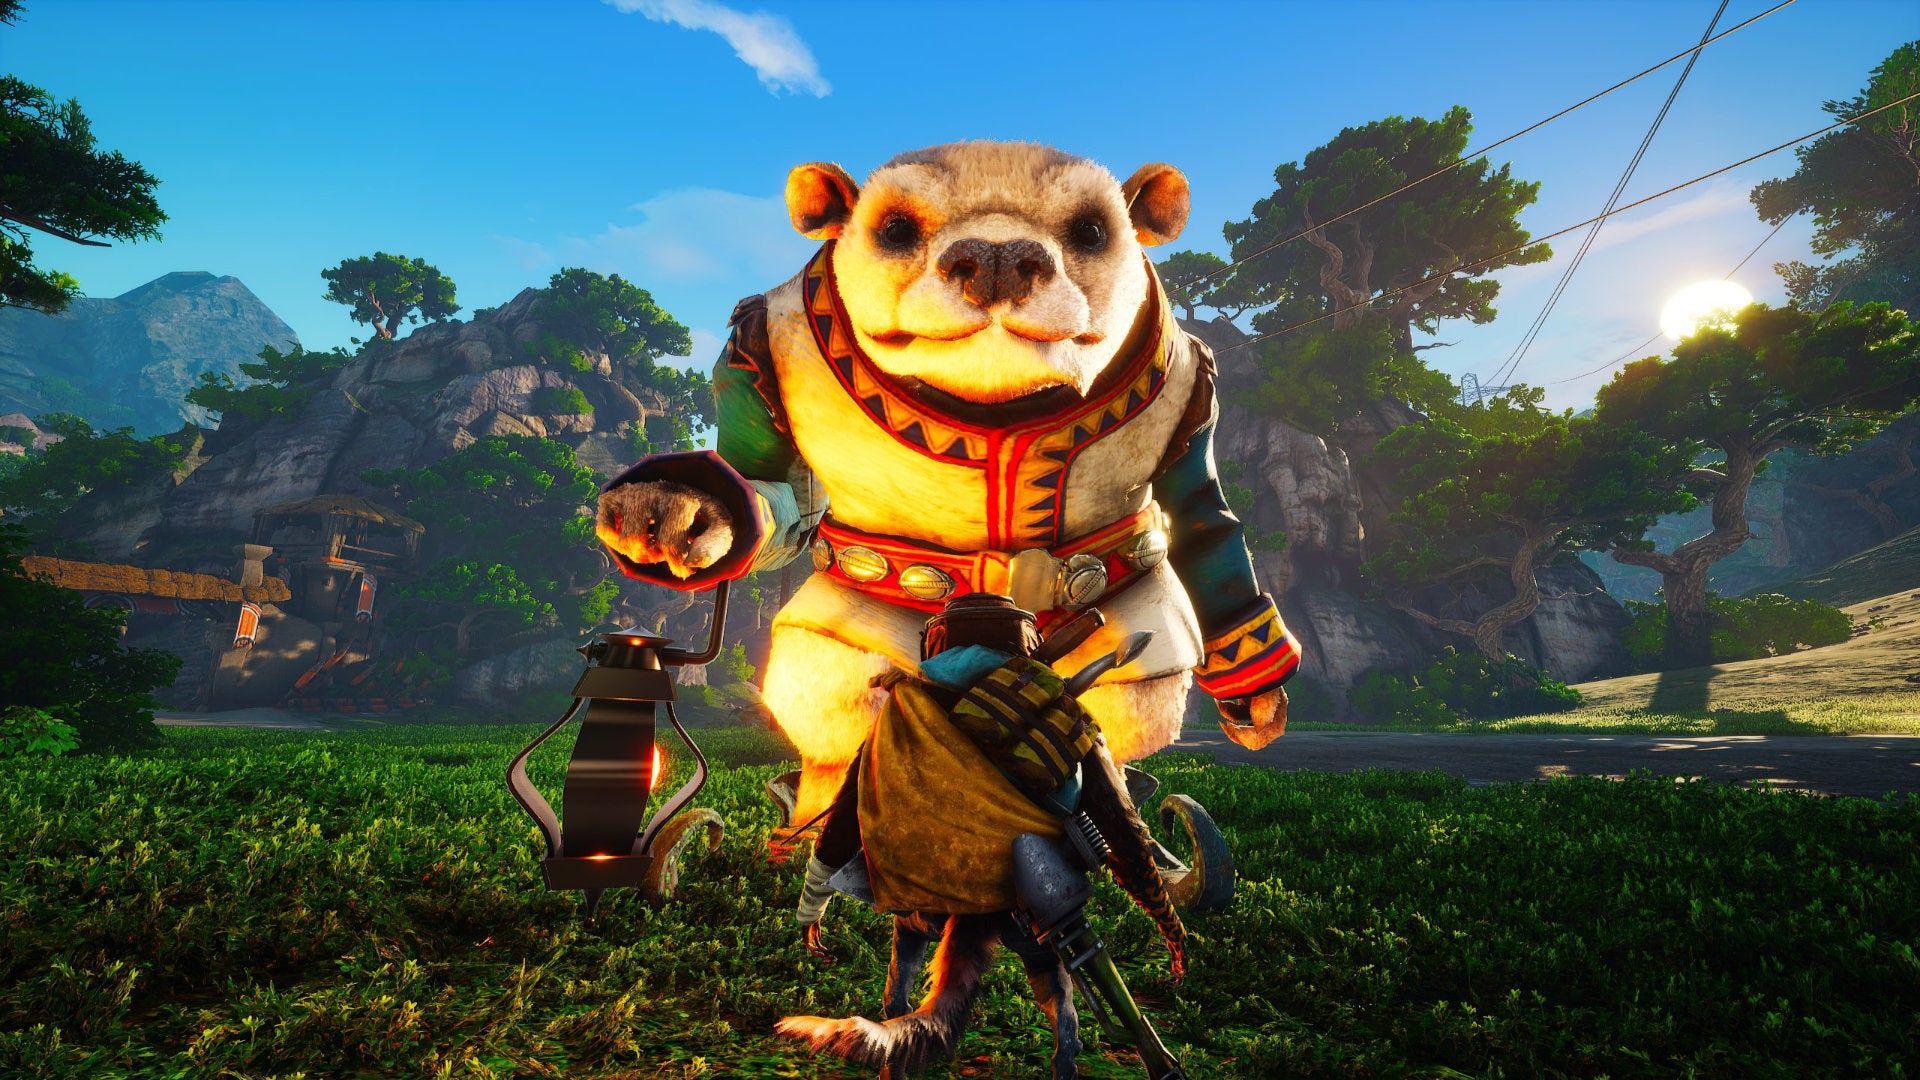 A Biomutant screenshot of one of the "mirage" side quest characters who you can interact with to delve into a past memory.